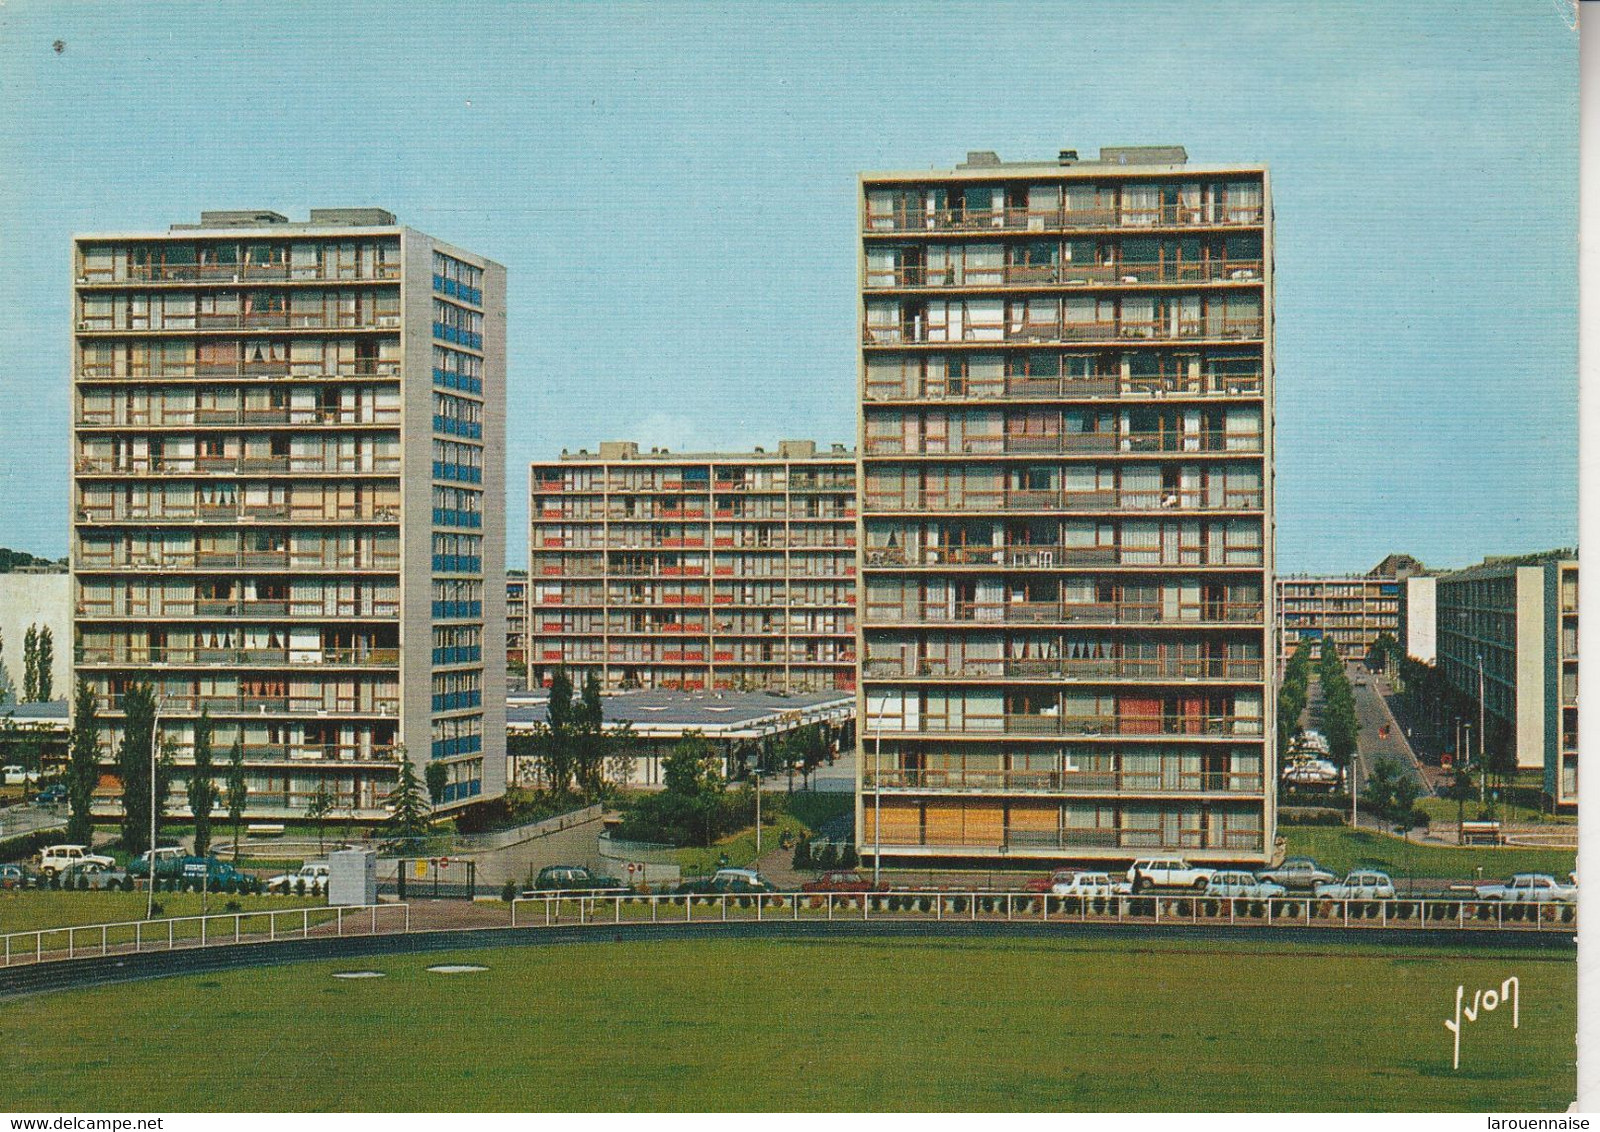 78 - VELIZY VILLACOUBLAY - Rue Paulhan - Velizy